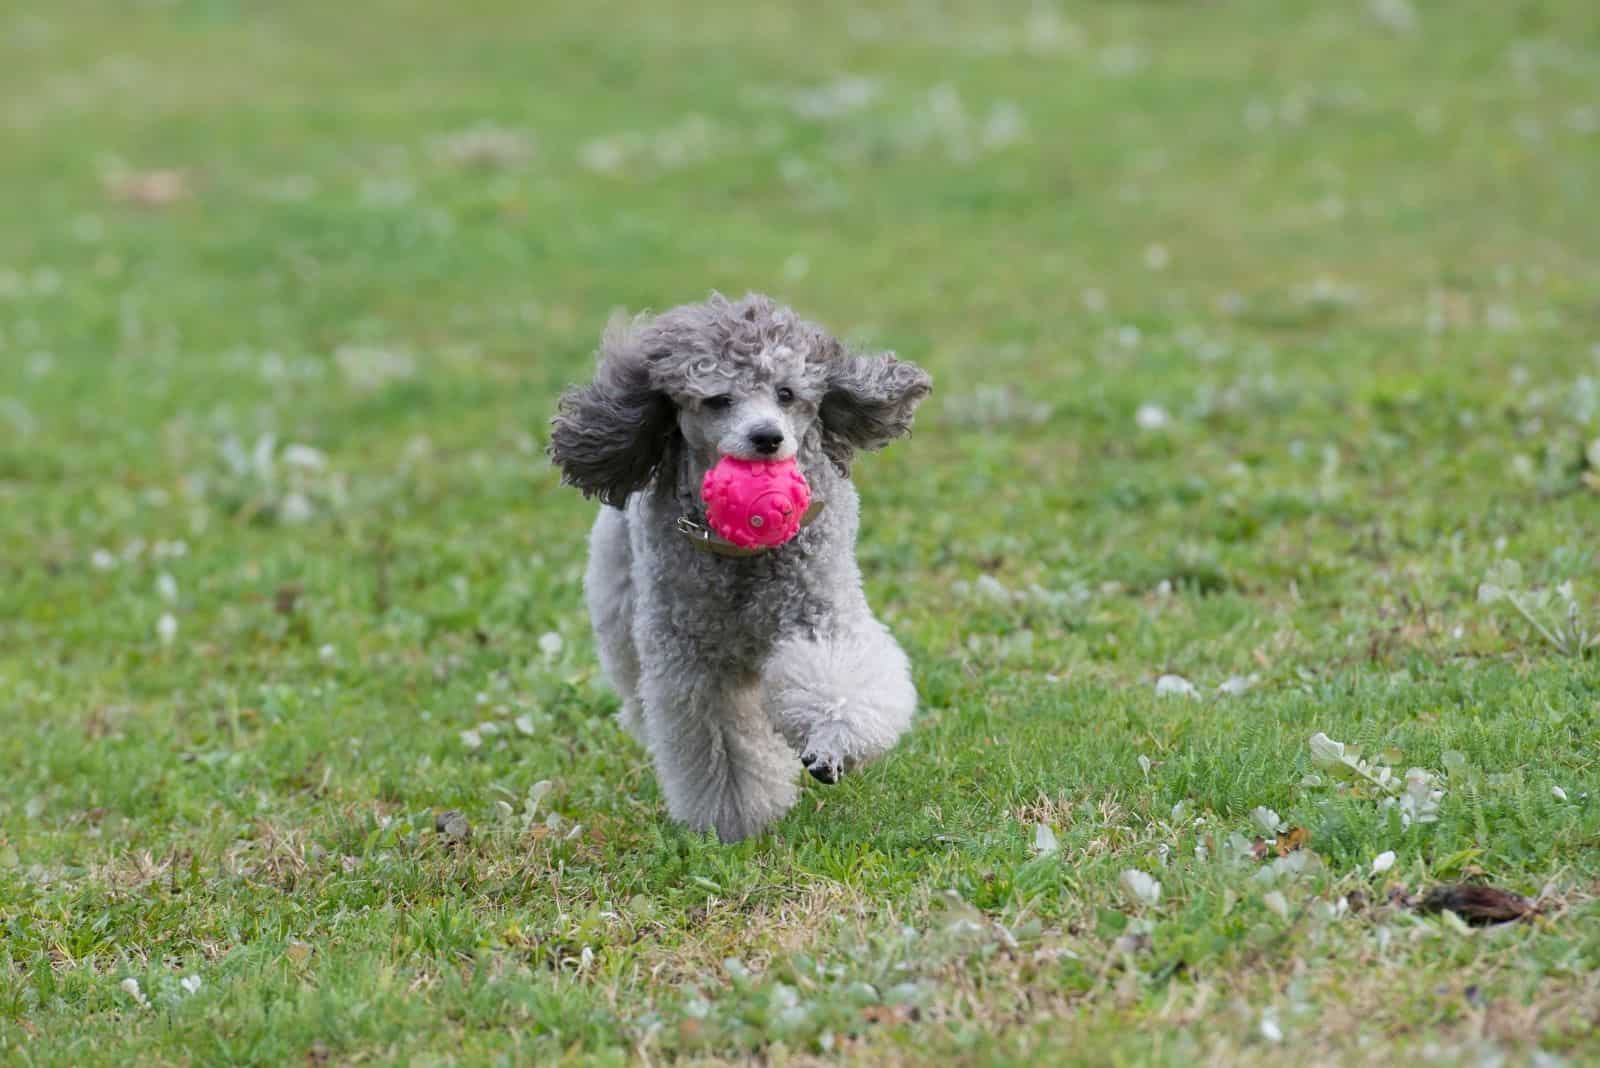 poodle playing in the field with a pink ball in its mouth and running